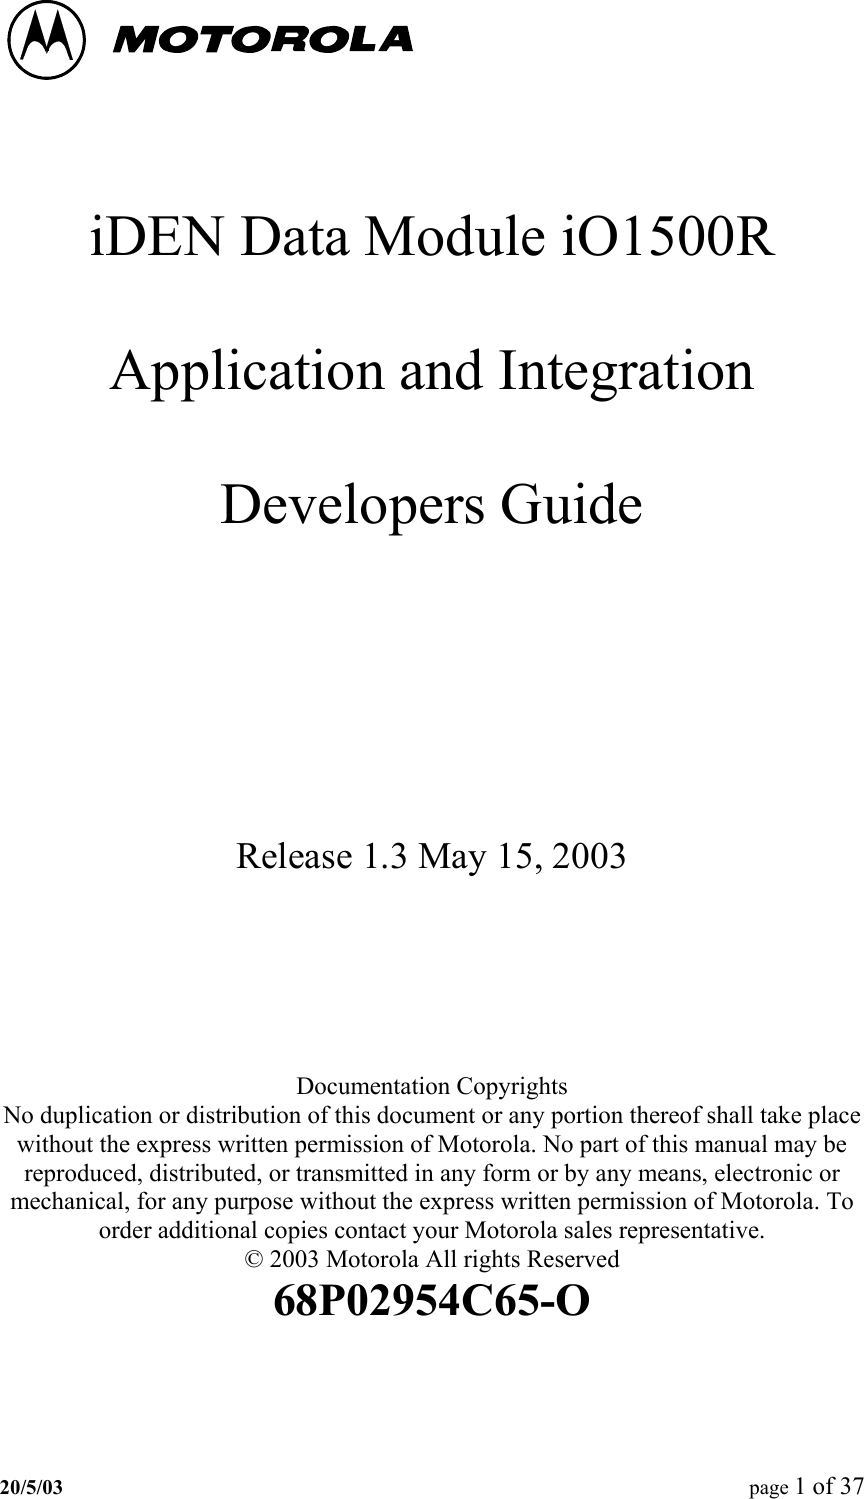     iDEN Data Module iO1500R  Application and Integration  Developers Guide    Release 1.3 May 15, 2003    Documentation Copyrights No duplication or distribution of this document or any portion thereof shall take place without the express written permission of Motorola. No part of this manual may be reproduced, distributed, or transmitted in any form or by any means, electronic or mechanical, for any purpose without the express written permission of Motorola. To order additional copies contact your Motorola sales representative. © 2003 Motorola All rights Reserved 68P02954C65-O 20/5/03  page 1 of 37   